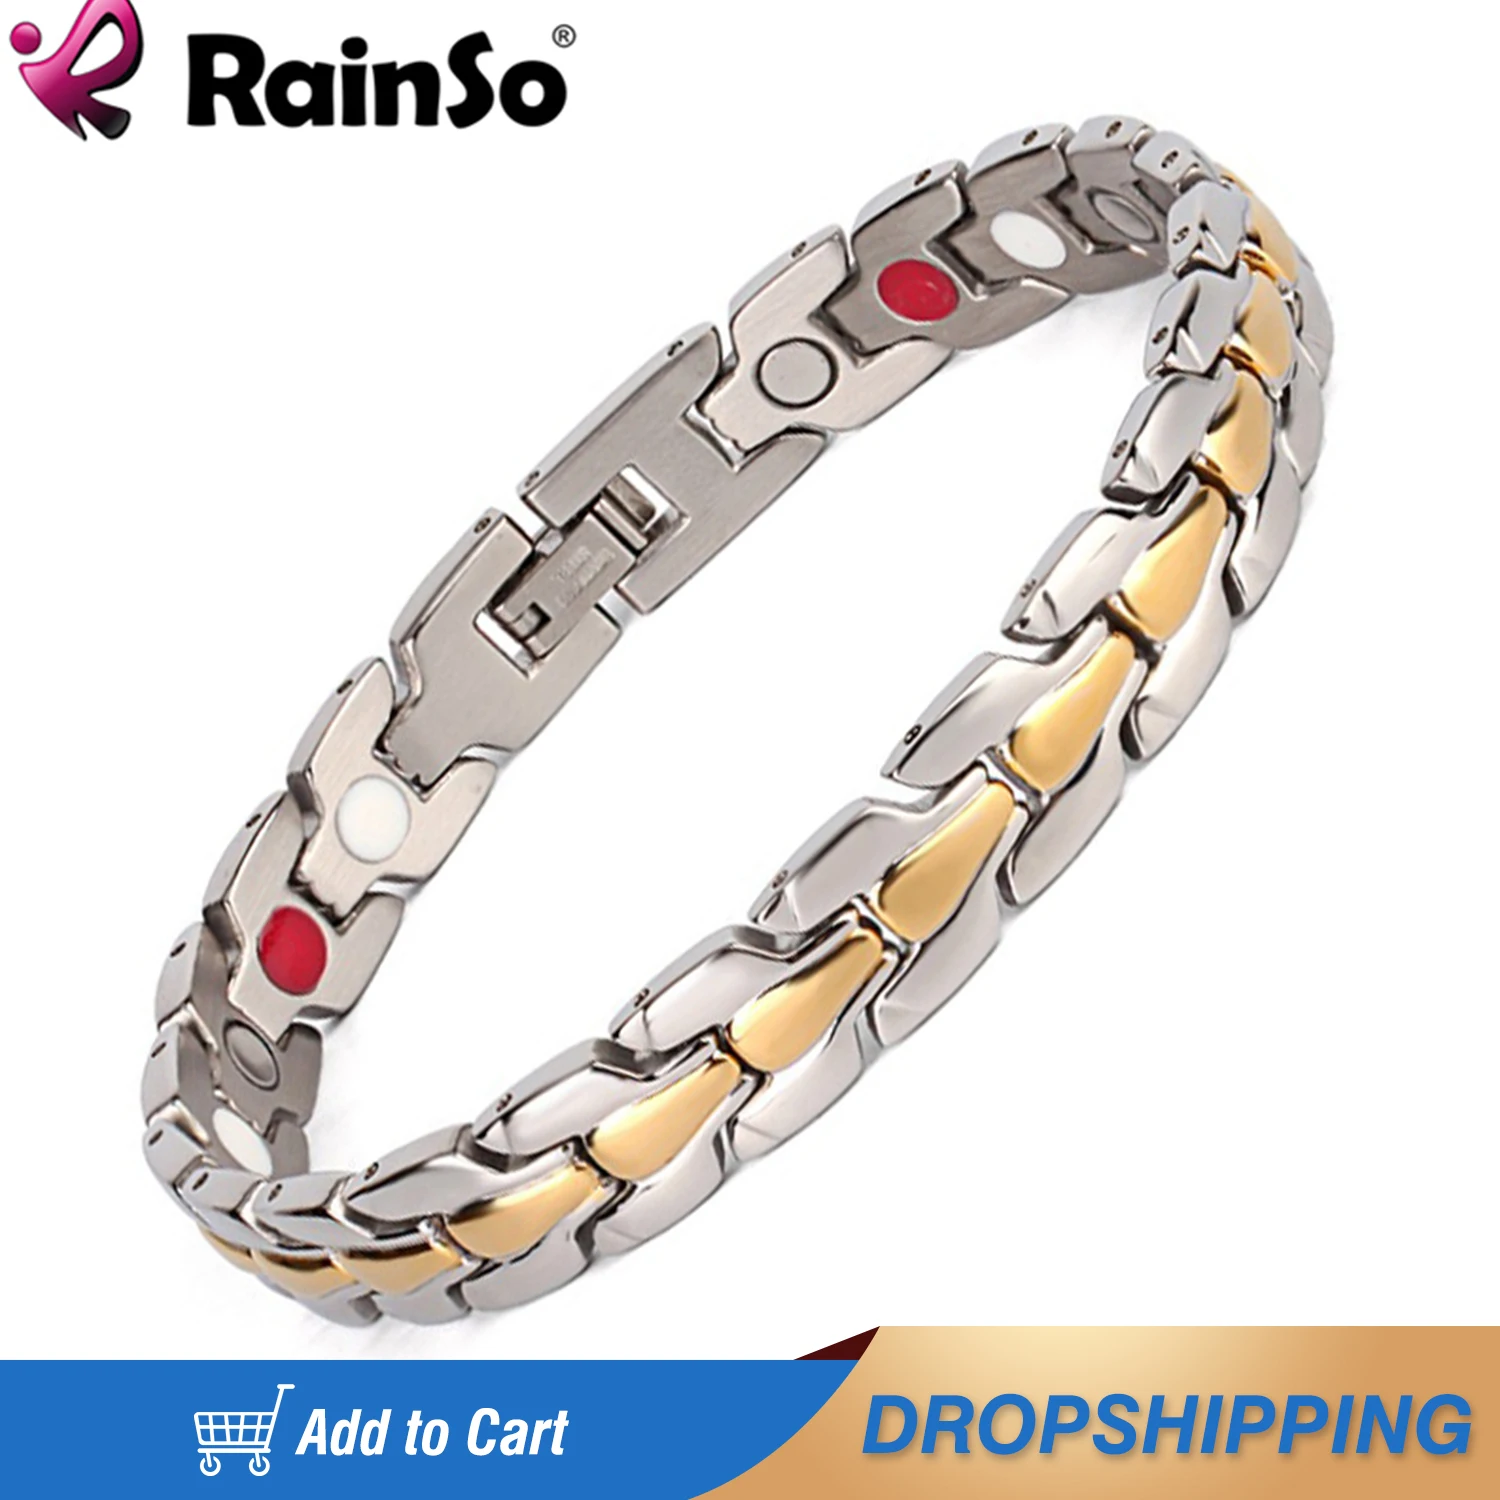 Rainso Fashion Stainless Steel Bracelet Men's Plated Bracelet Magnetic Bracelet(ion and FIR) 4in1 healthy Jewelry Bangle For Men